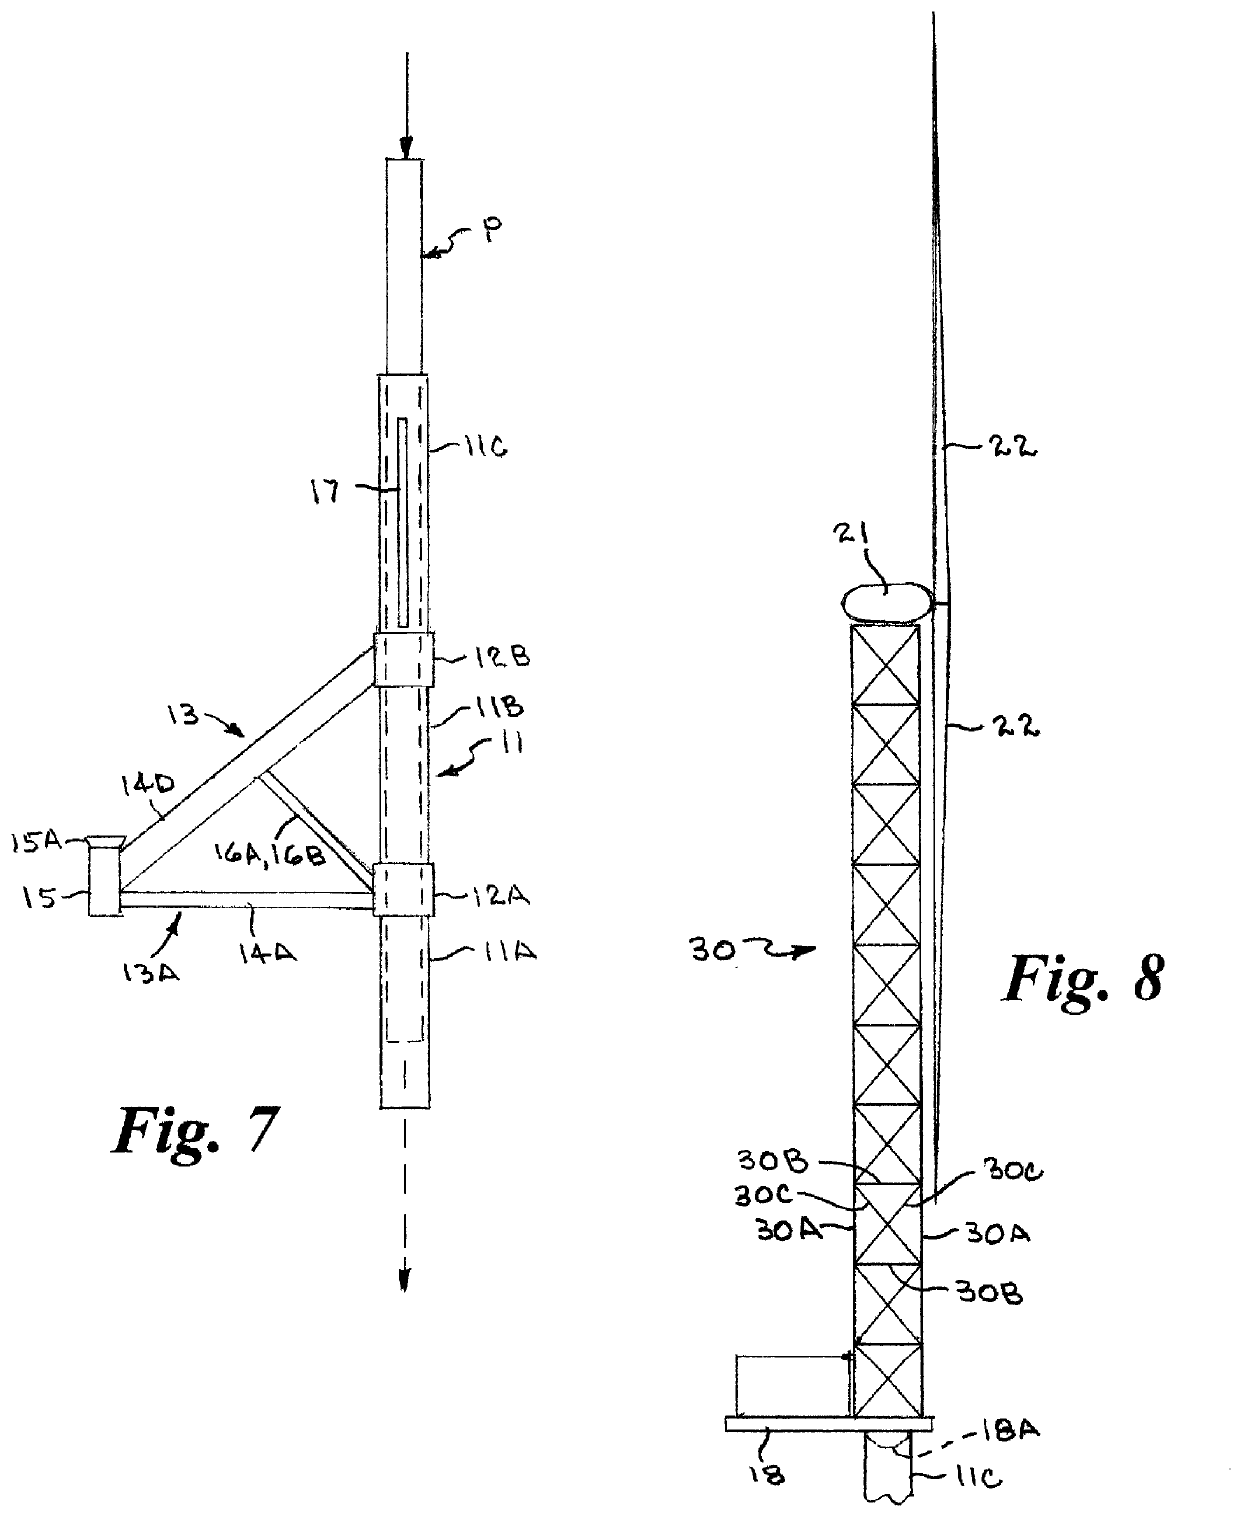 Offshore monopile wind turbine with triangular support structure